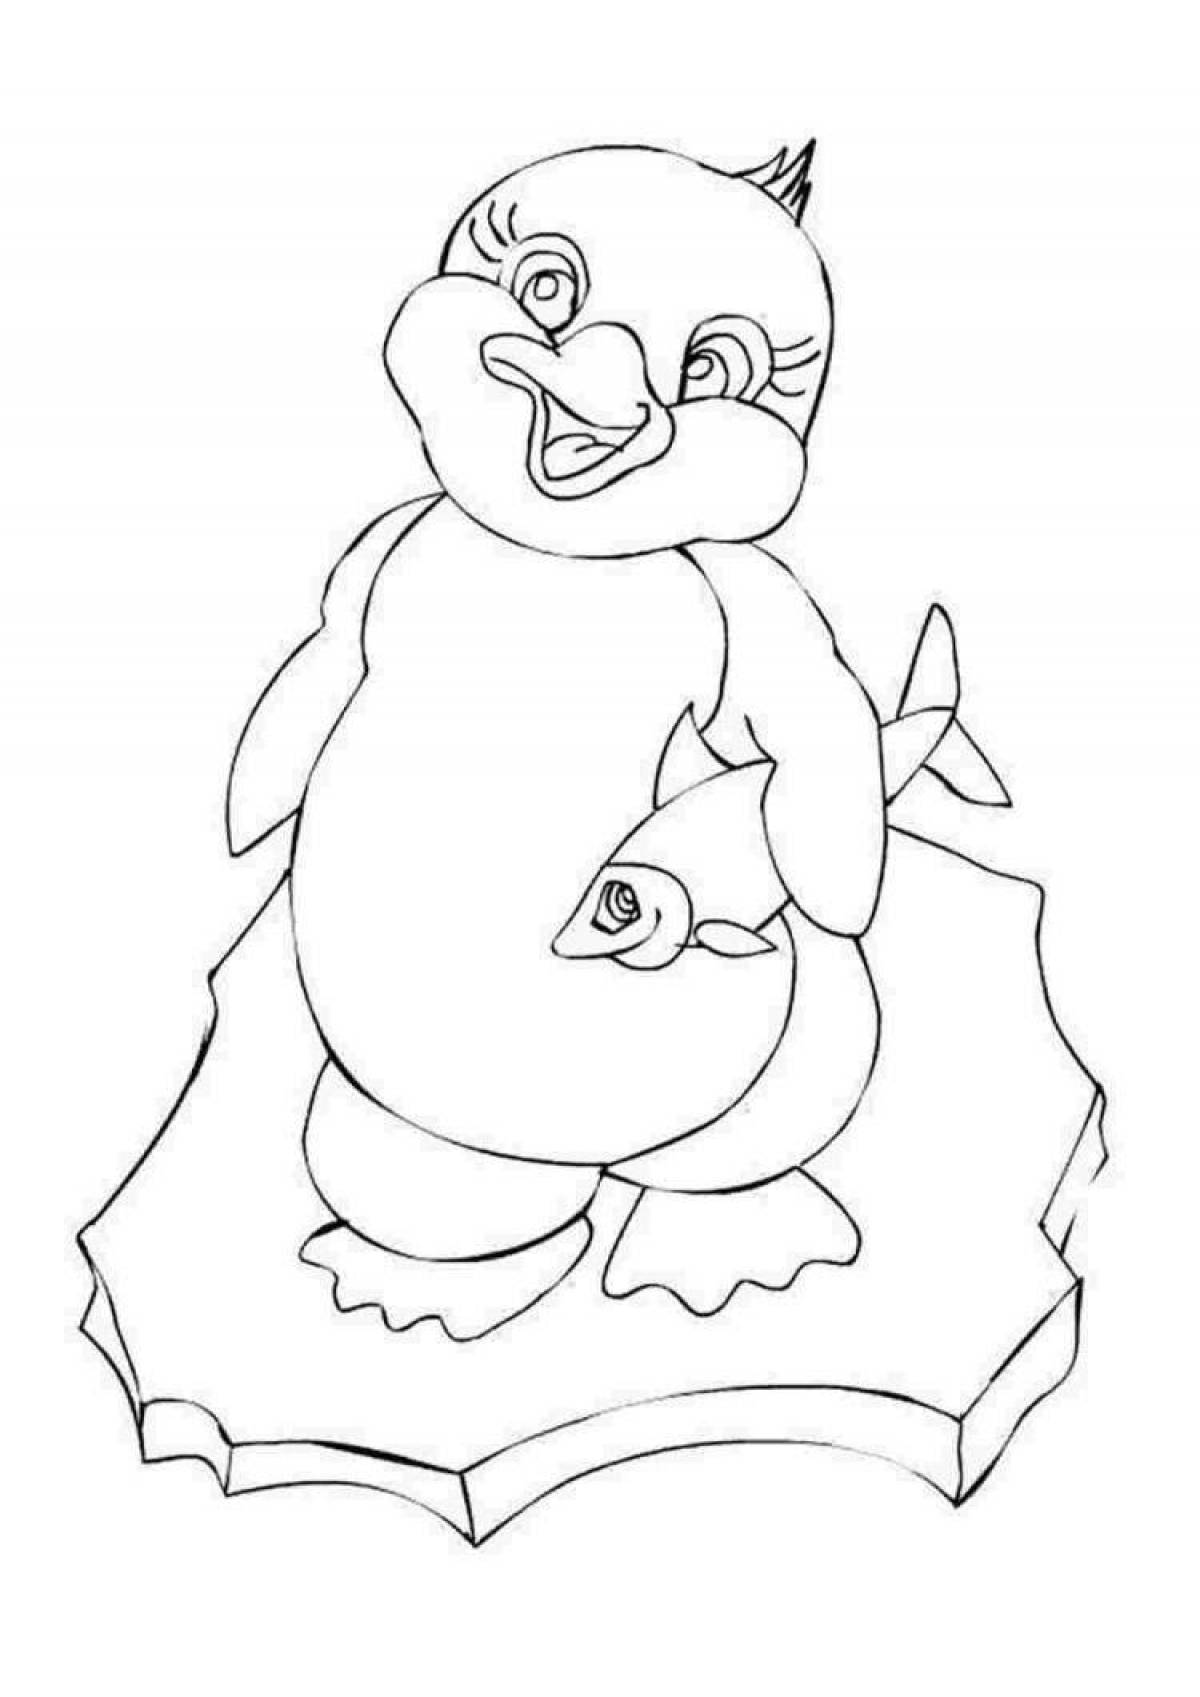 Gorgeous penguin coloring page